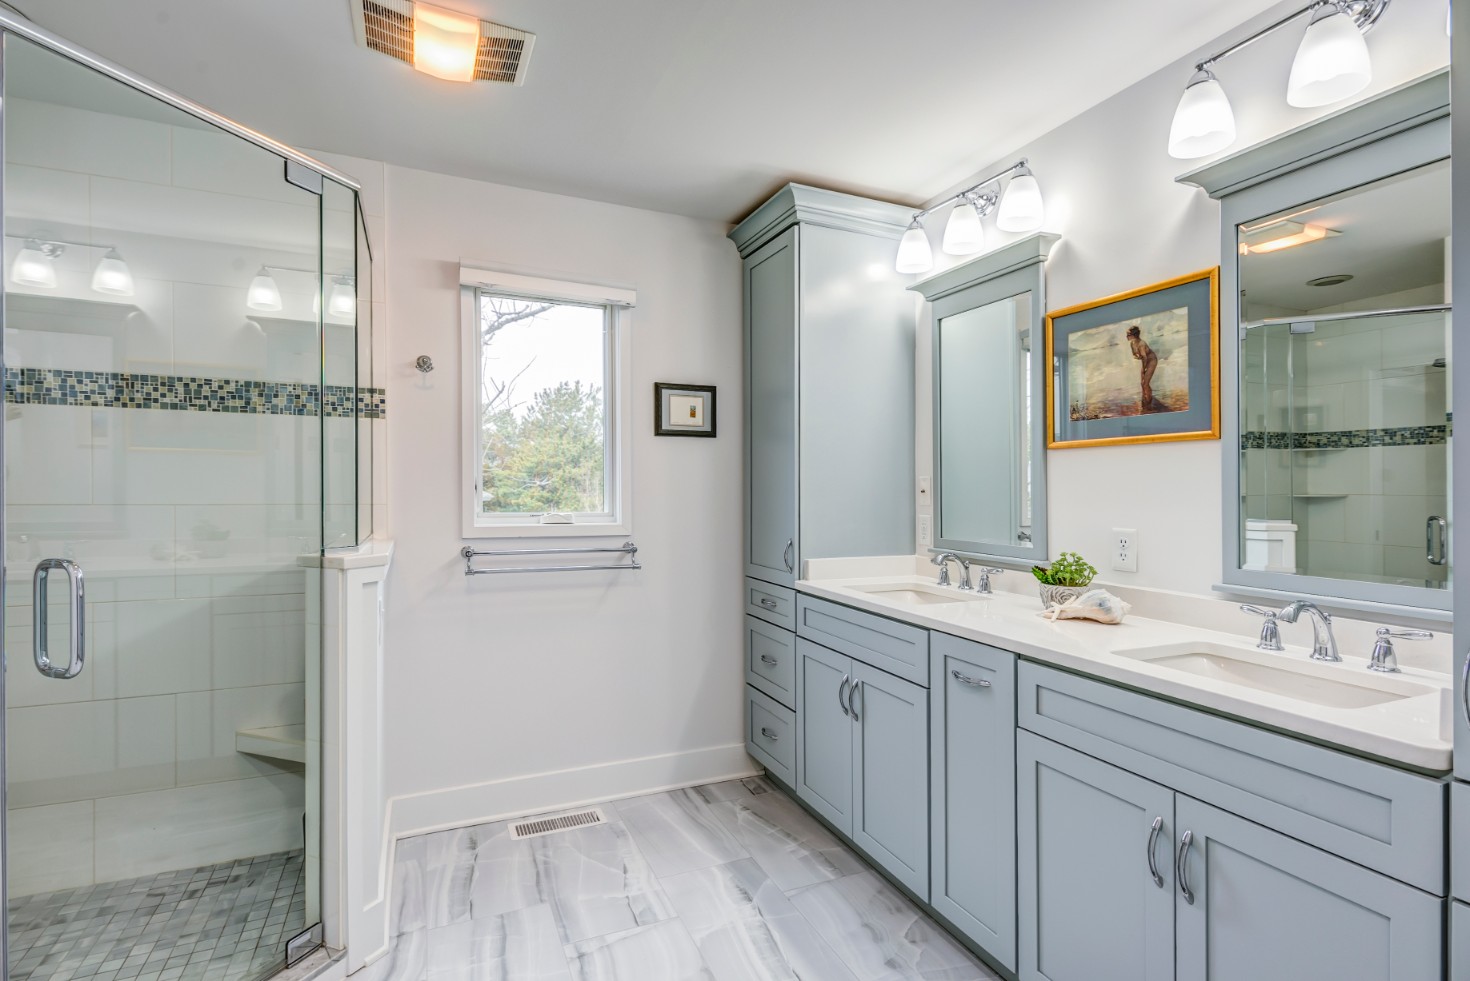 Cotton Patch Hills Renovation in Bethany Beach DE - Bathroom with White Wall Paint, Two Sinks and Two Rectangular Mirrors